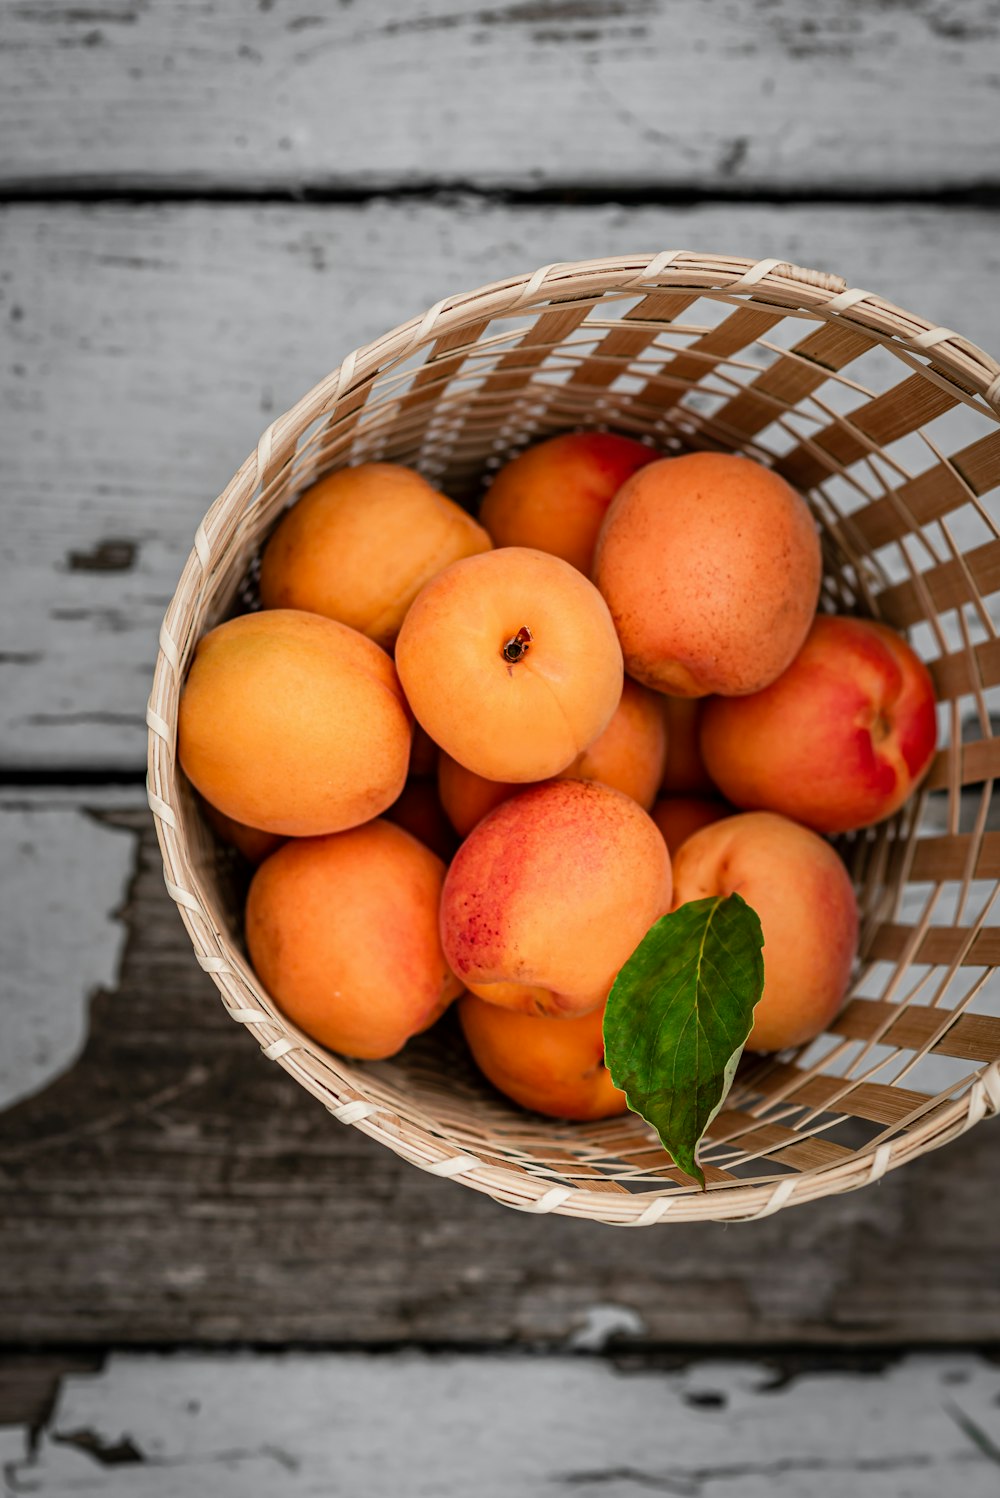 a basket filled with lots of ripe peaches